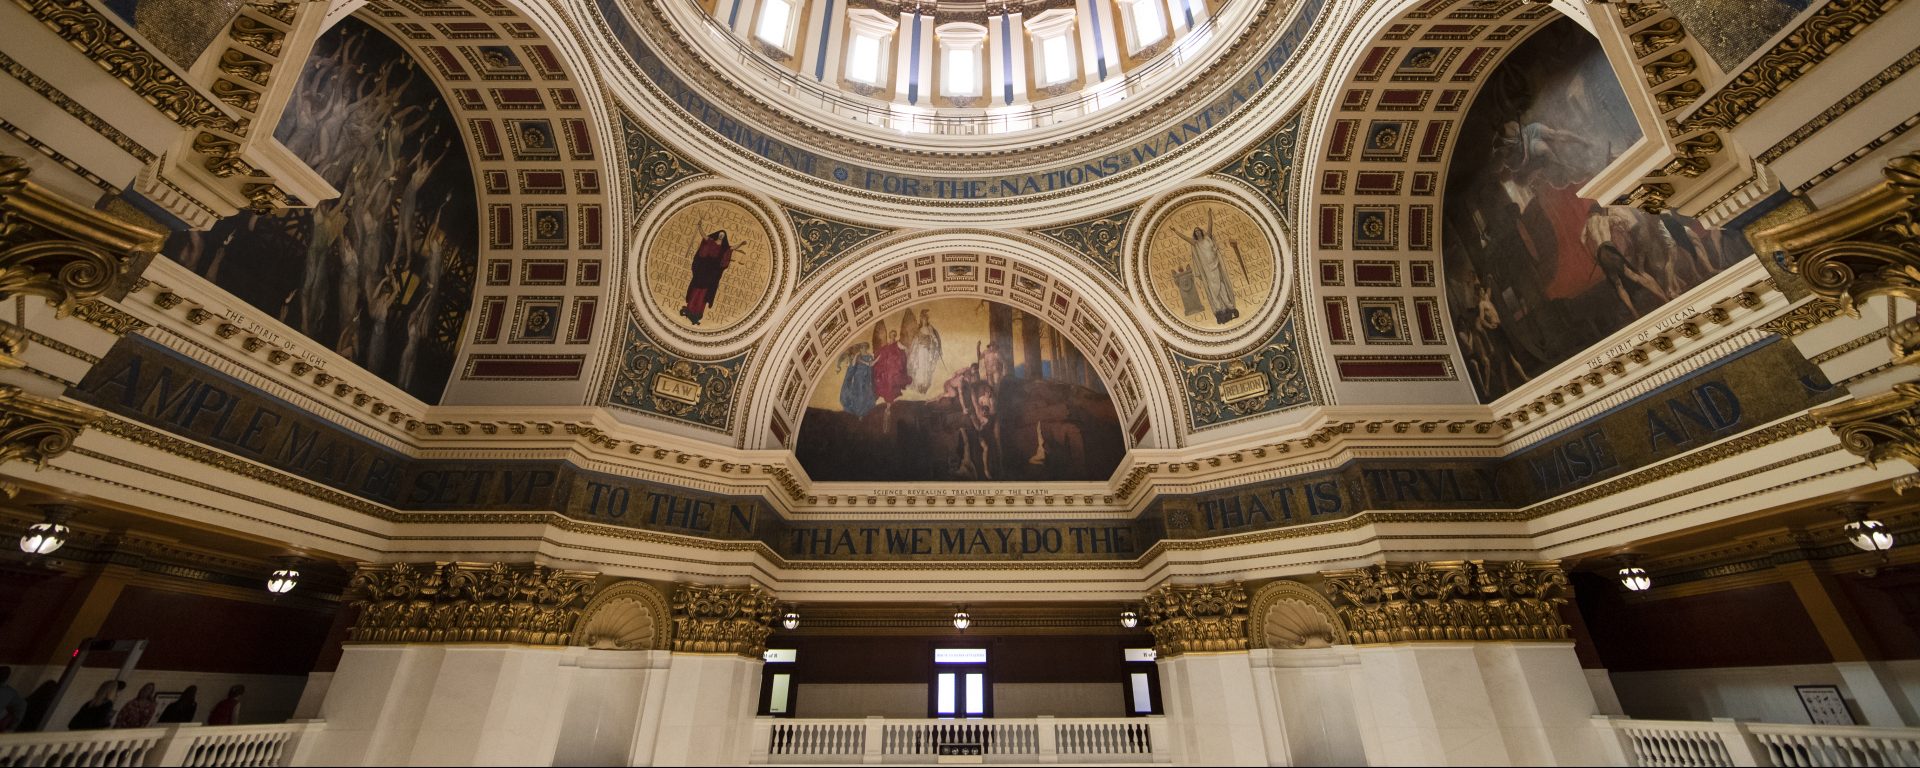 FILE PHOTO: This Nov. 20, 2019 file photo shows the Pennsylvania Capitol in Harrisburg, Pa. Pennsylvania's once-delayed spring primary in about two weeks will feature legislative and congressional races, a first run for some new paper-record voting systems and the first use of newly legalized mail-in ballots. Voter registration was ending Monday, May 18, 2020 for the June 2 primary, as the latest figures showed Pennsylvanians embracing a new vote-by-mail system.